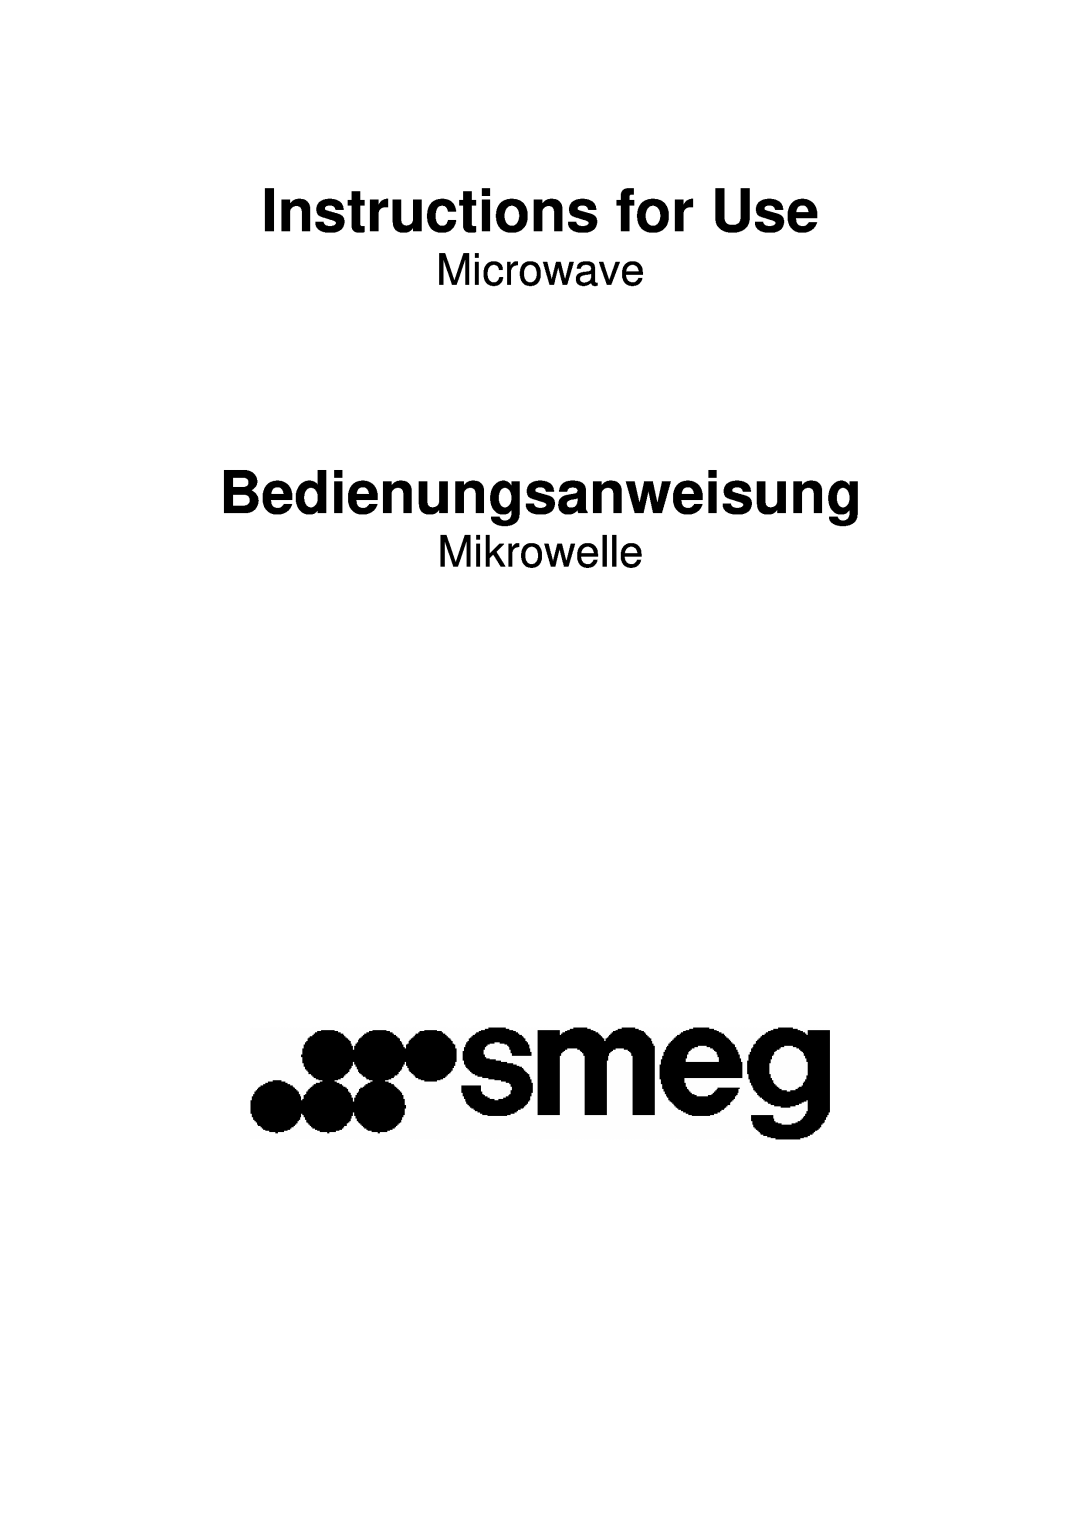 Smeg SC45M manual Instructions for Use, Bedienungsanweisung, Microwave, Mikrowelle 